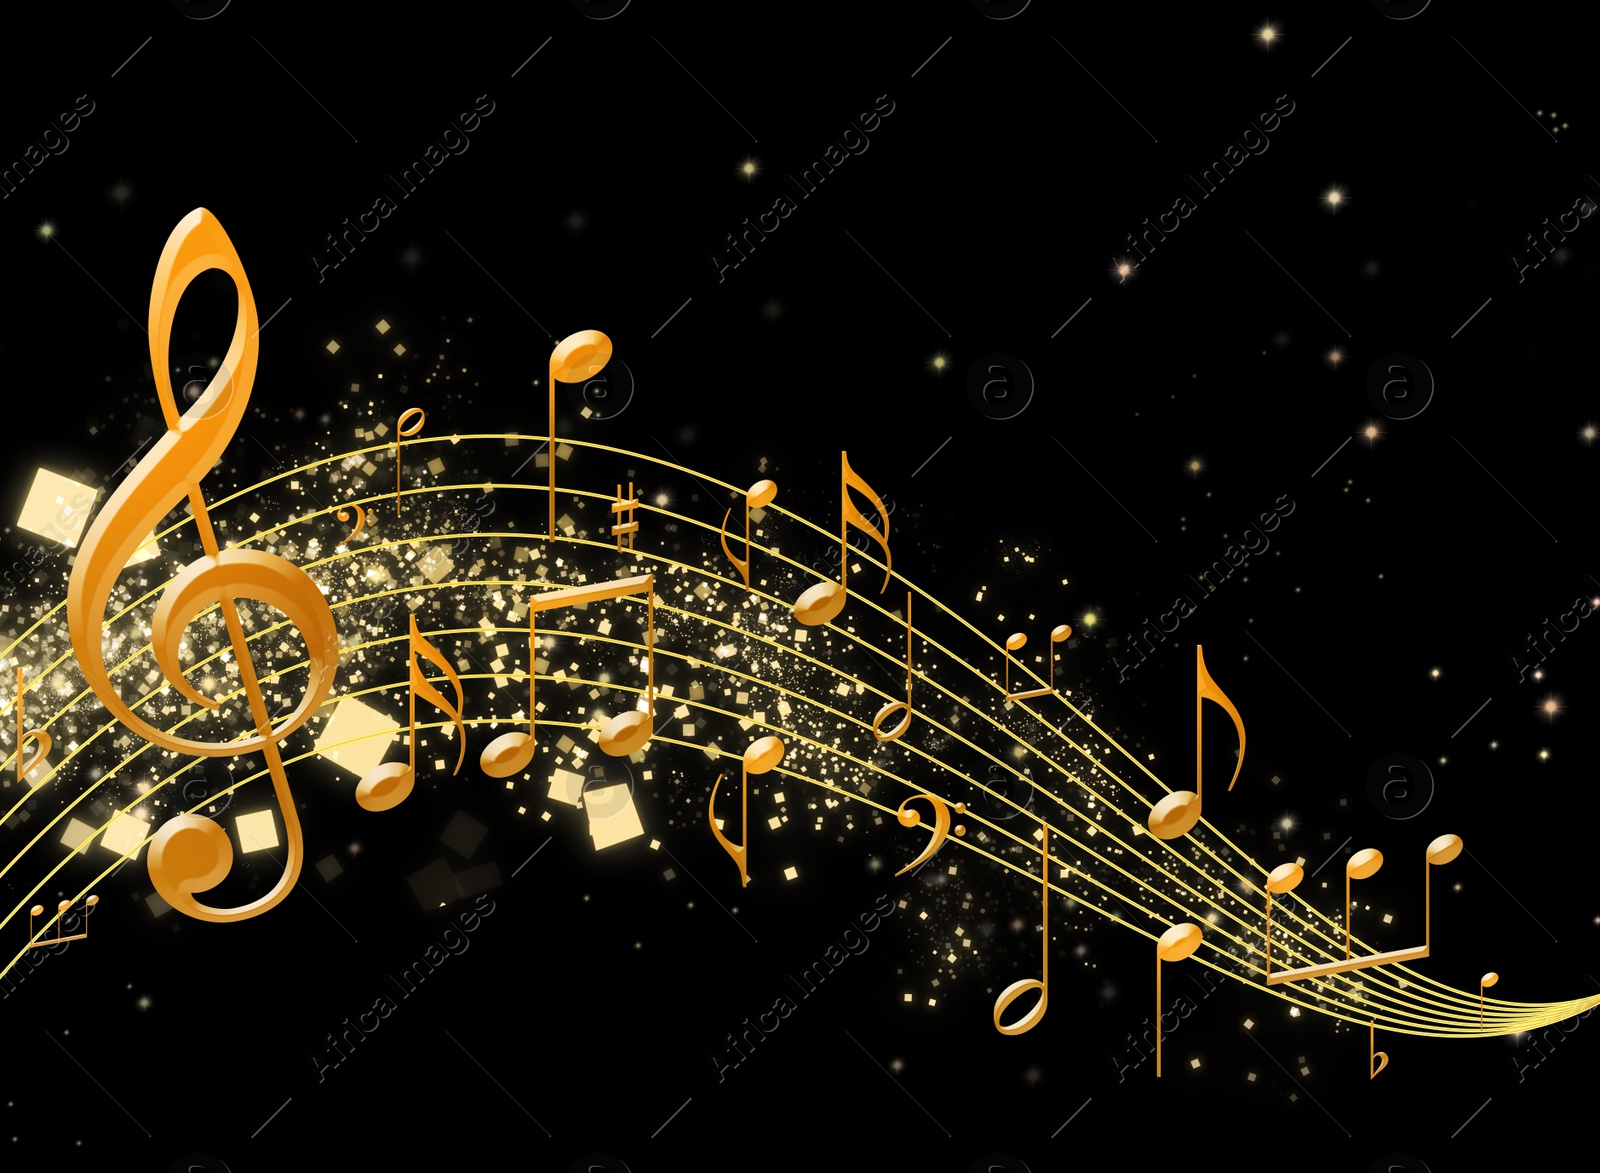 Illustration of Staff with music notes and other musical symbols on black background